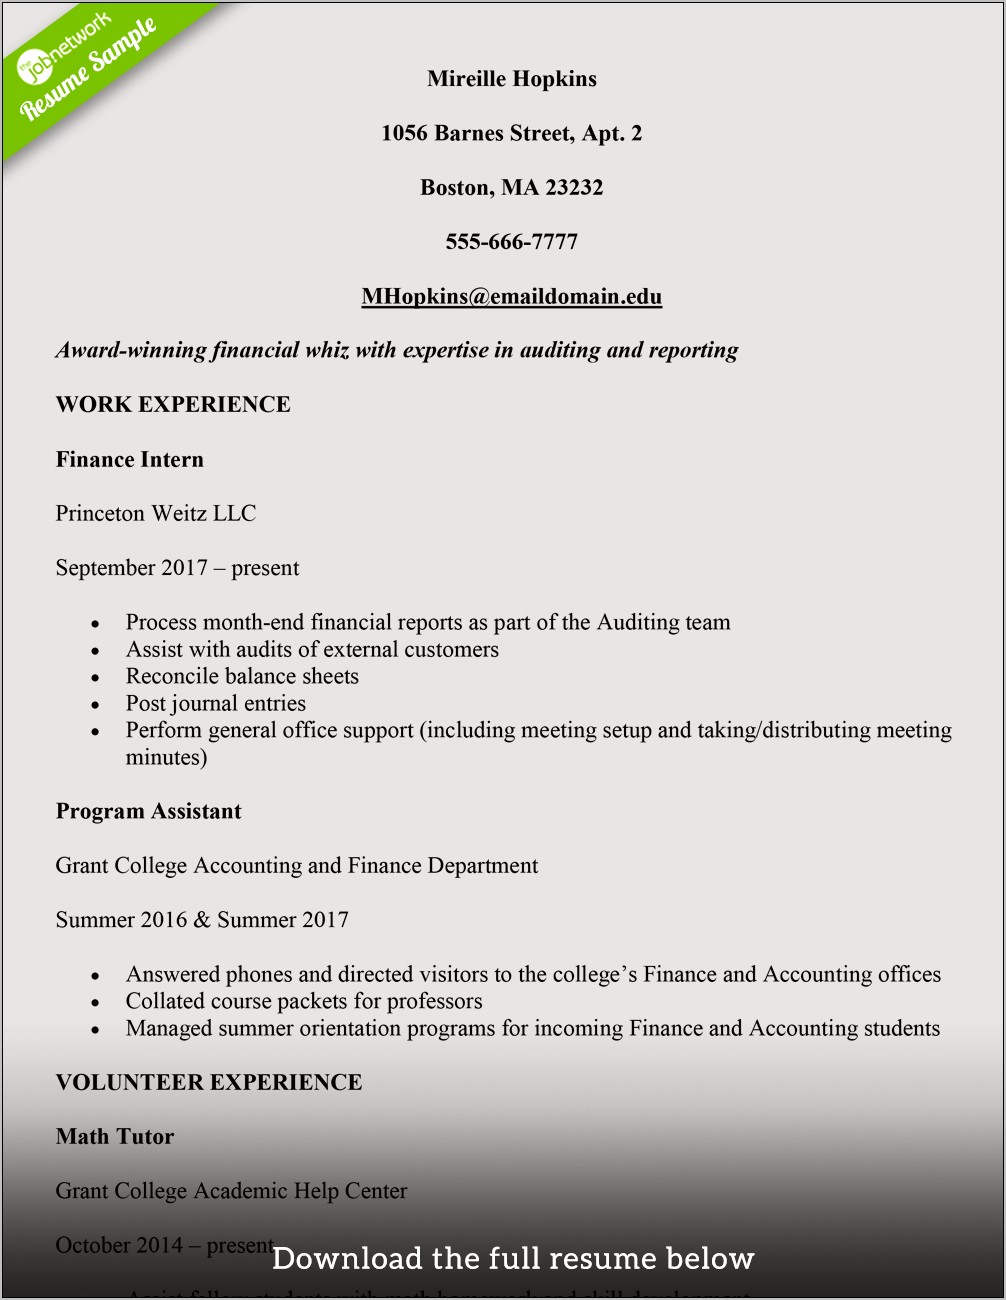 Sample Resume For Person In College